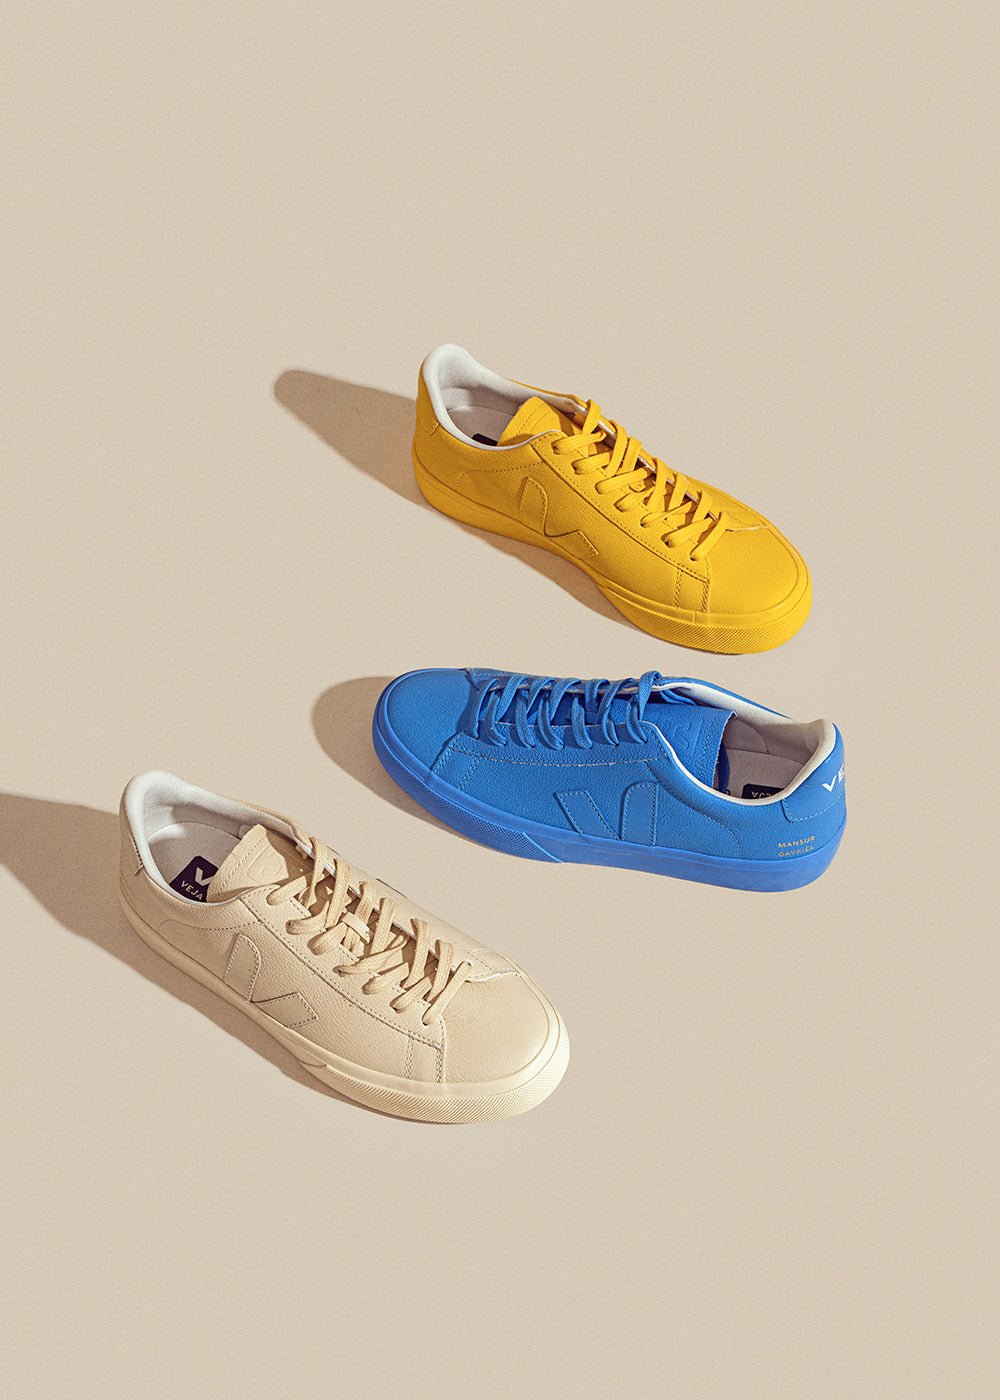 Veja Sunshine Campo Sneaker - New Classics Studios Sustainable Ethical Fashion Canada